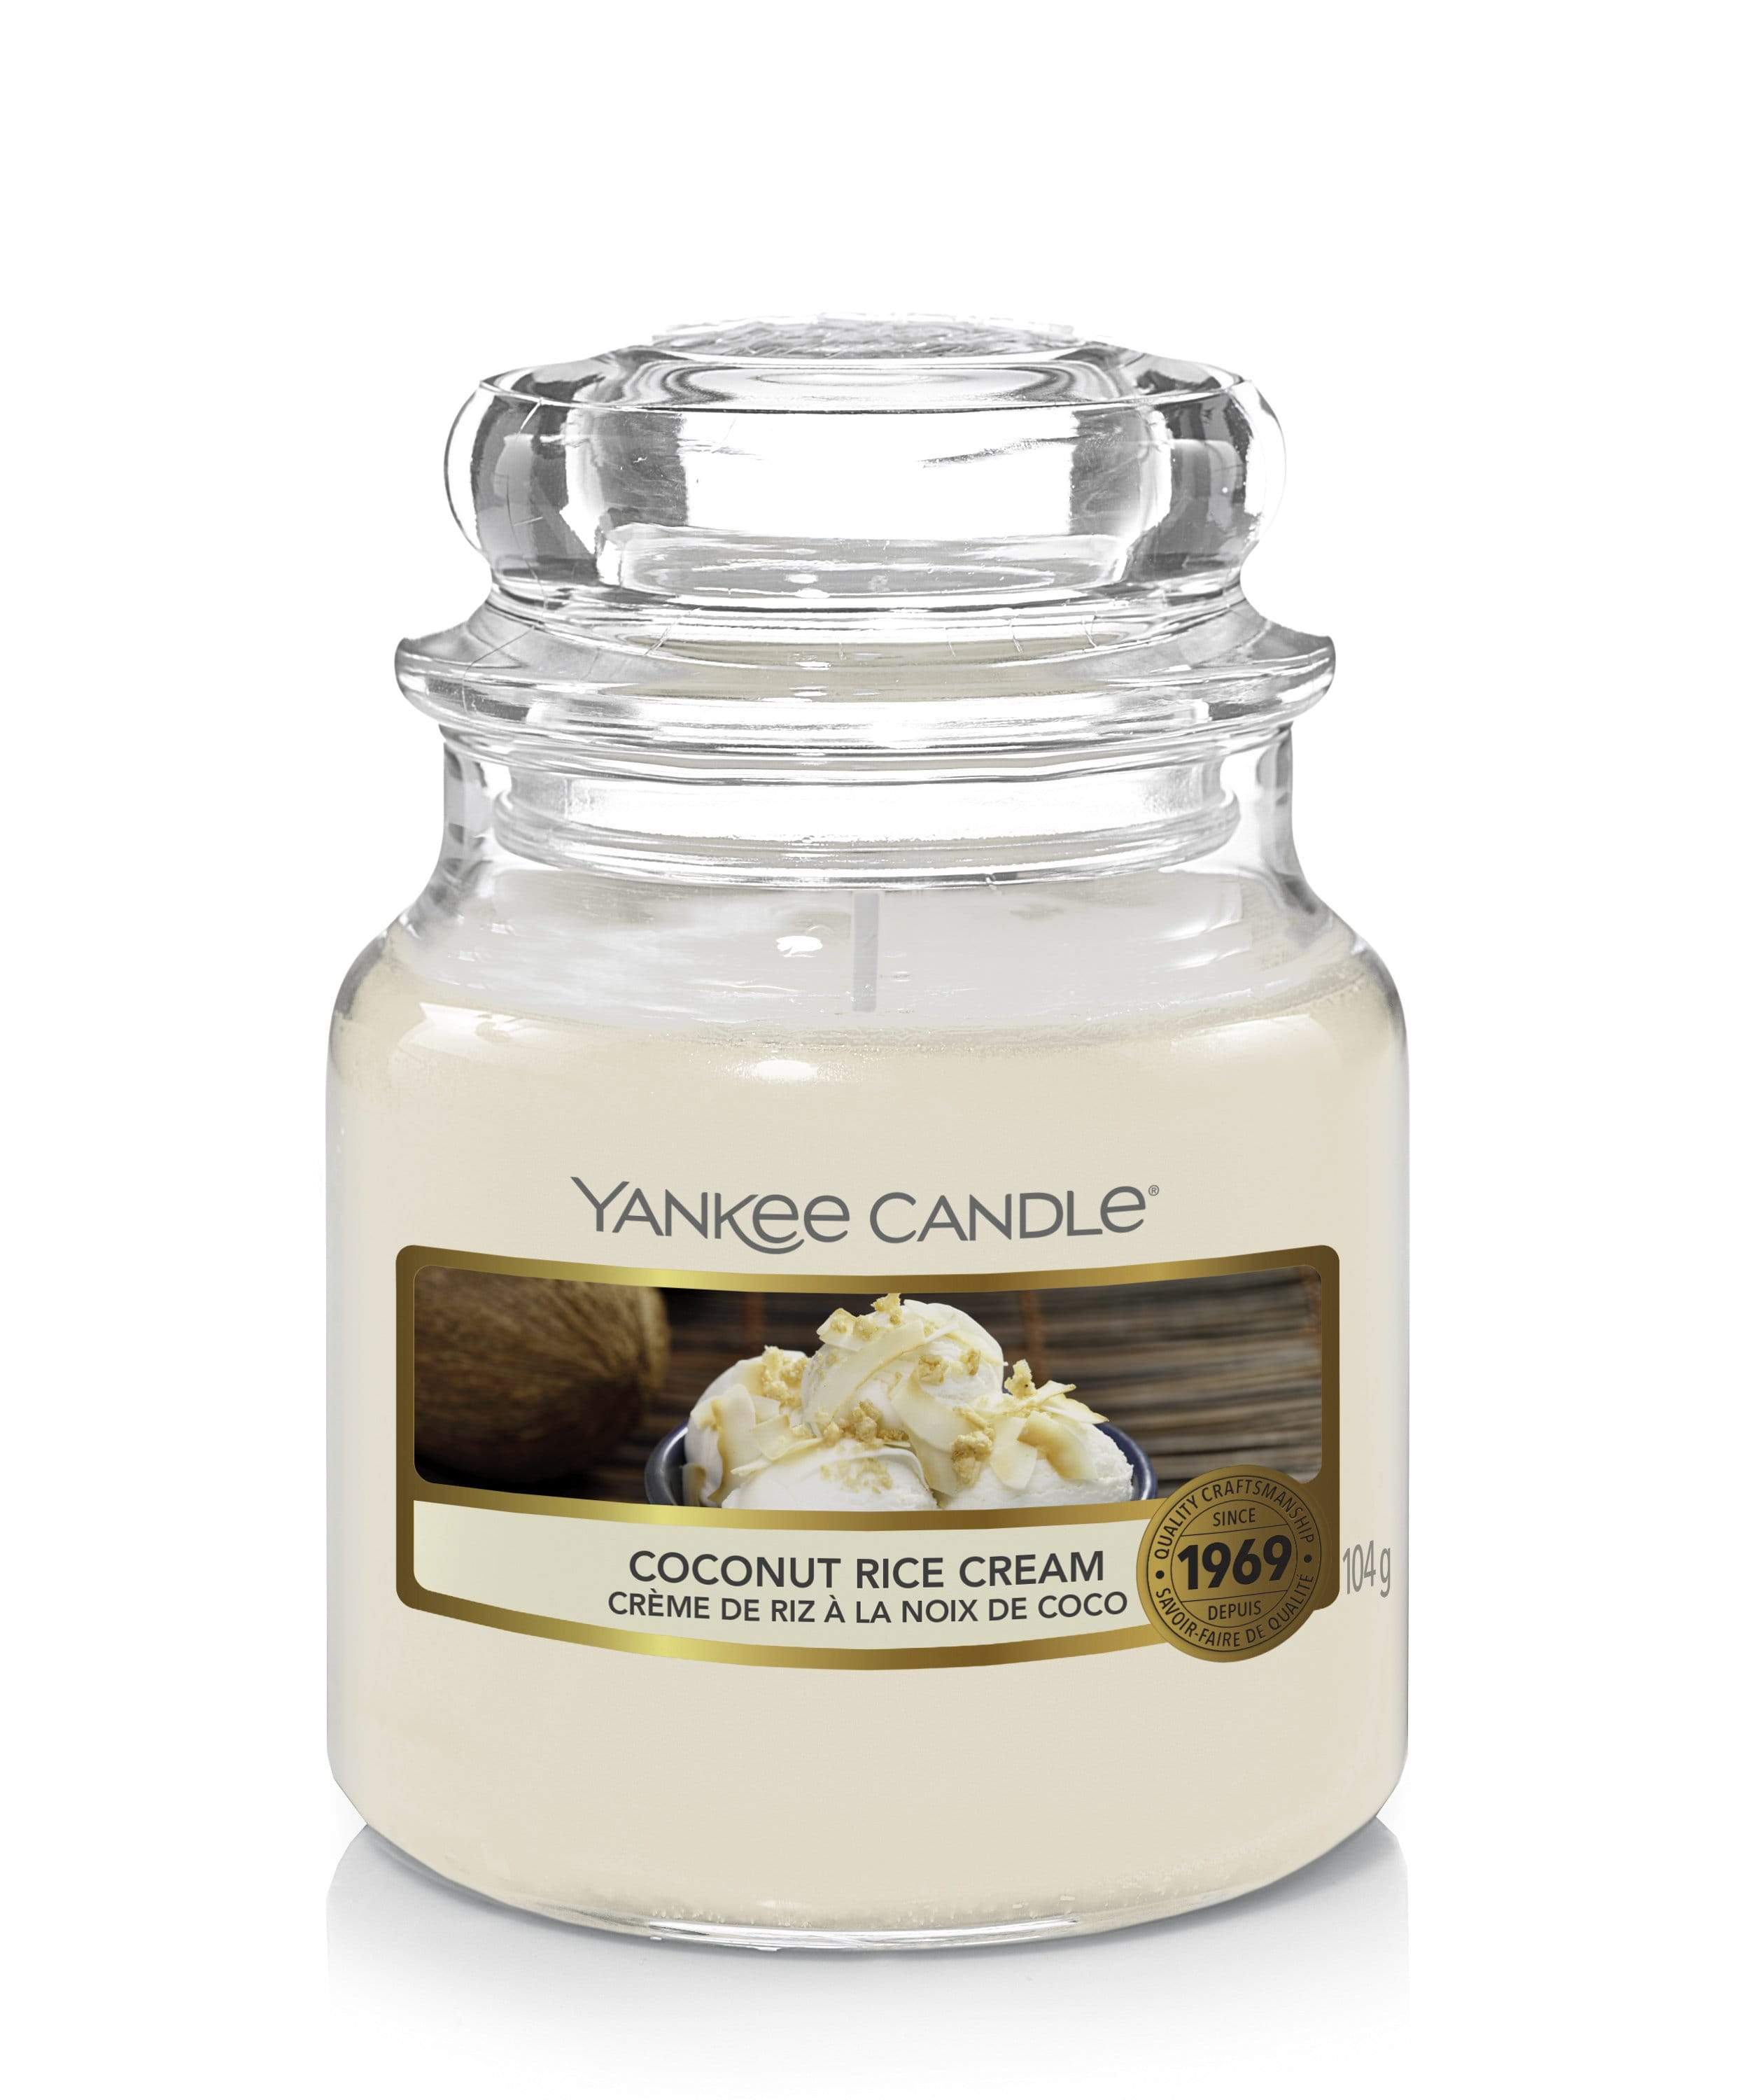 Yankee Candle Small Jar Candle Yankee Candle Small Jar - Coconut Rice Cream